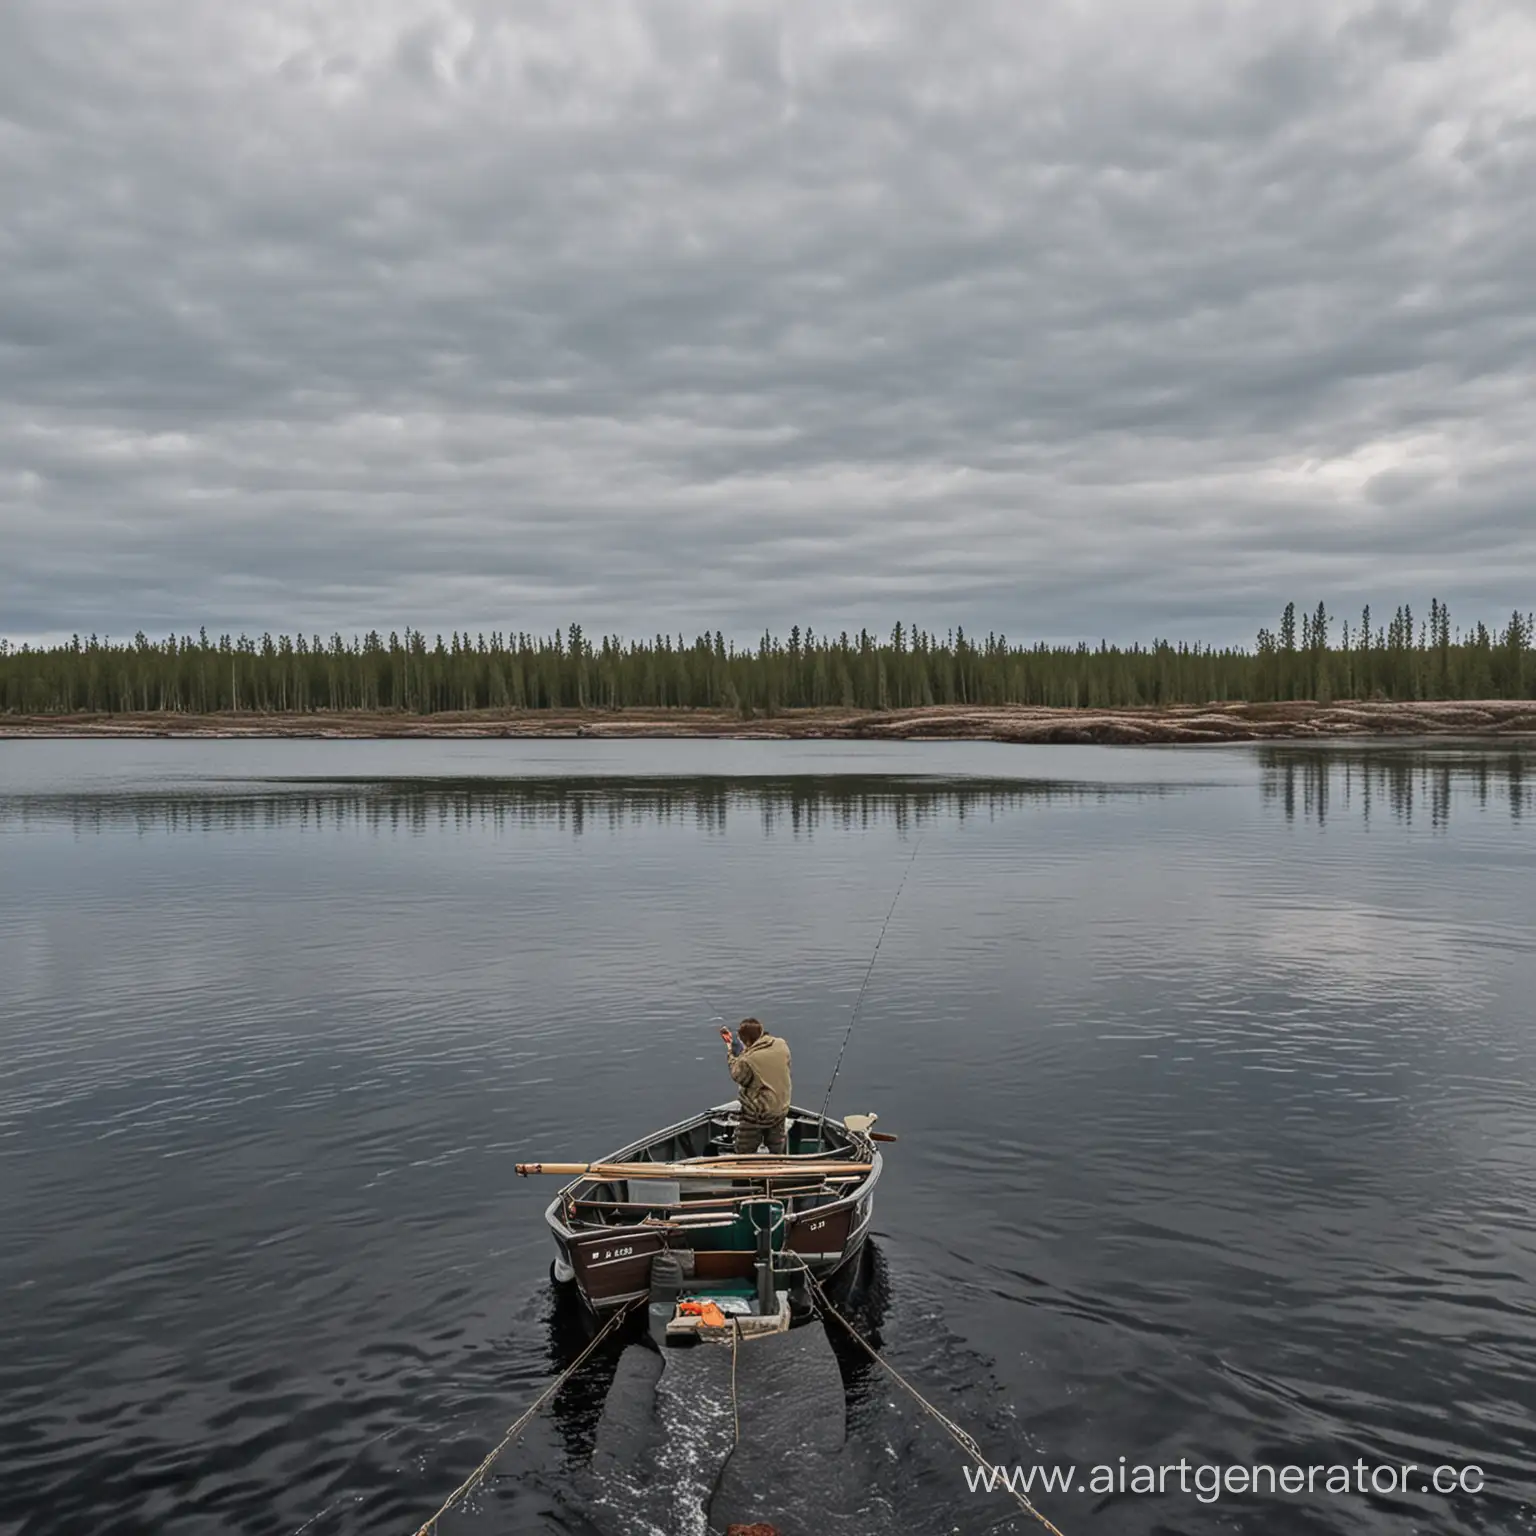 Tranquil-Fishing-Scene-on-a-Boat-in-Karelia-Capturing-Natural-Beauty